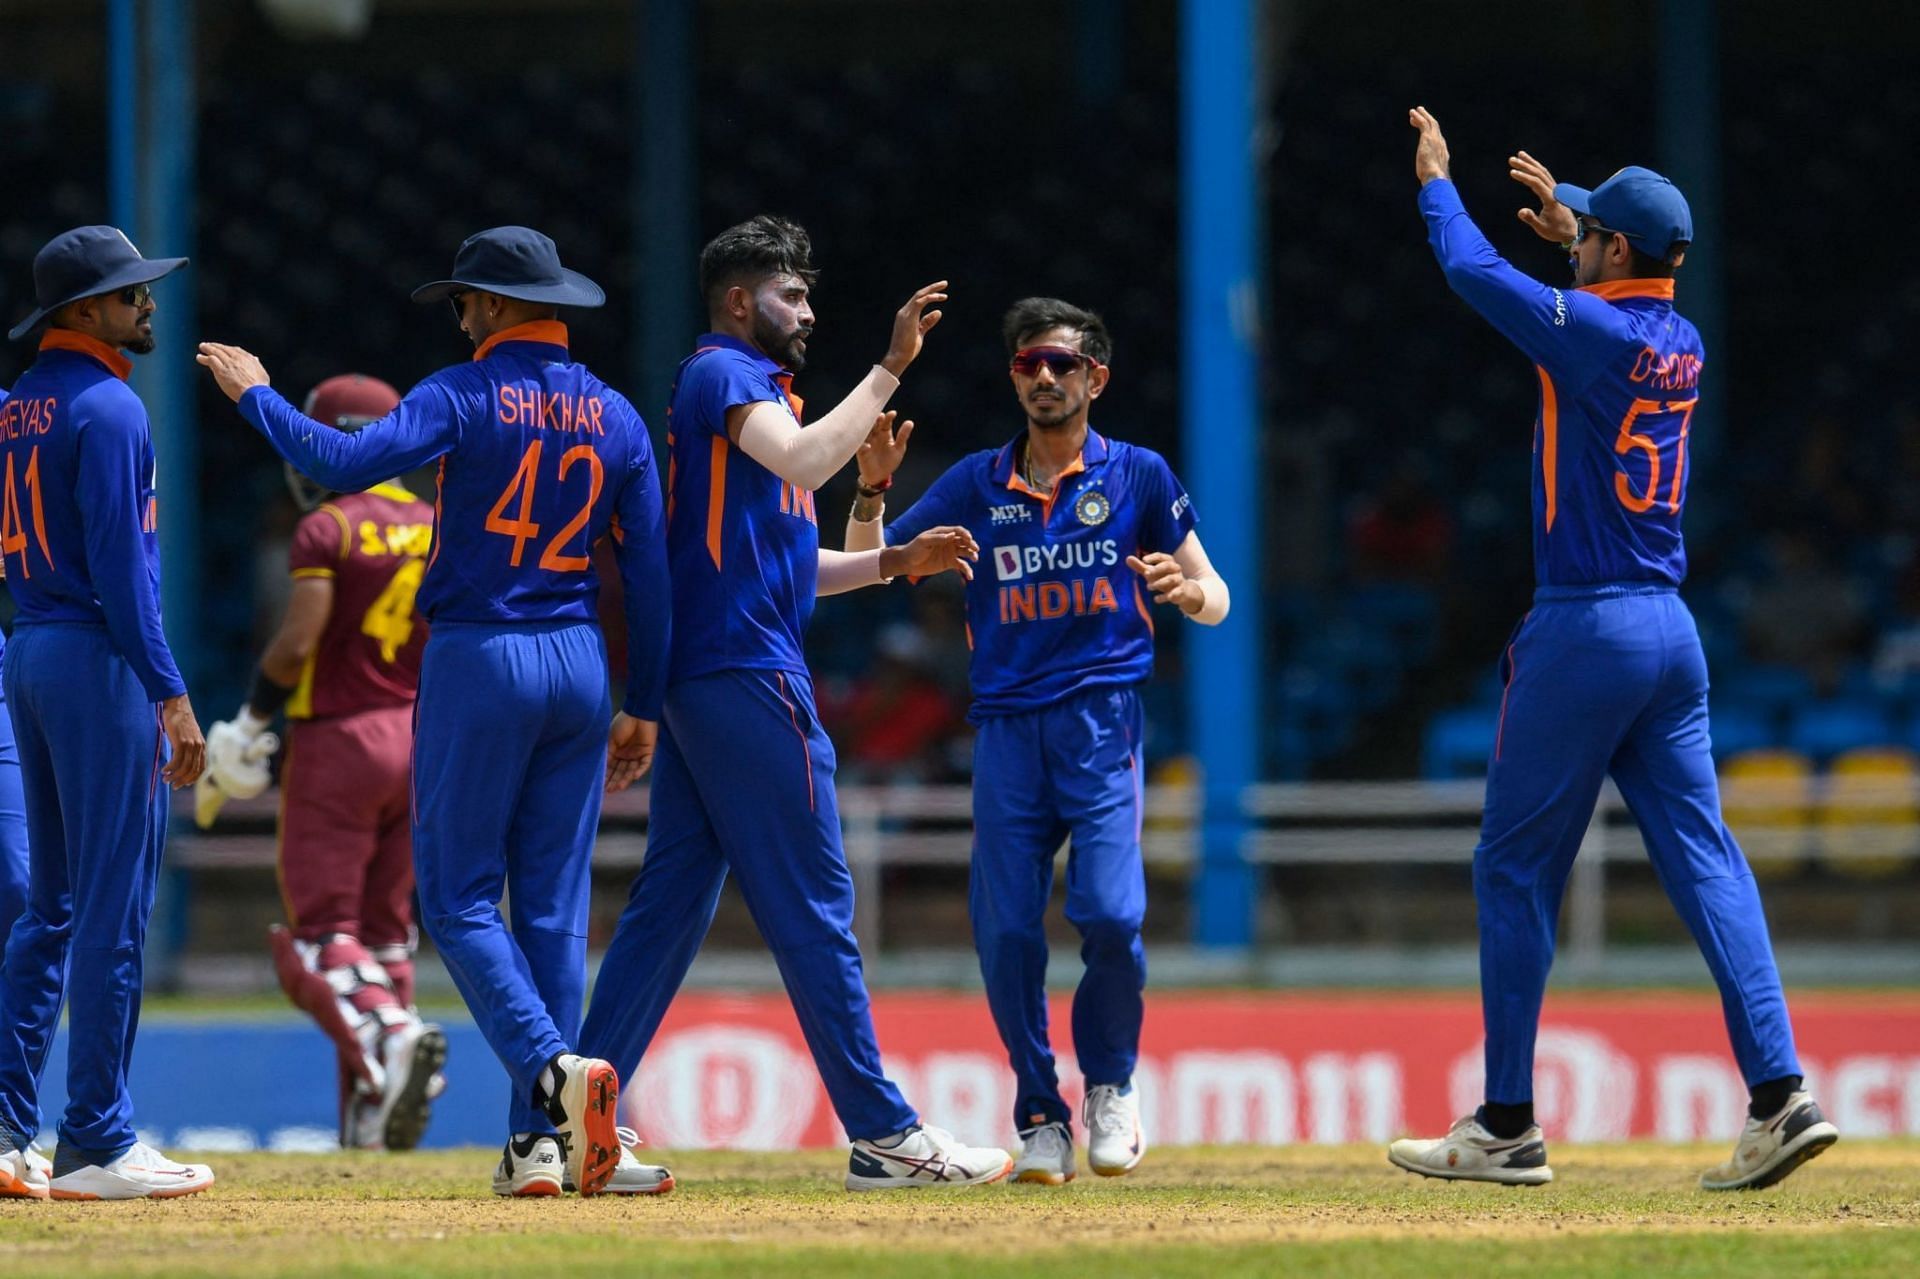 Men in Blue won the first ODI vs West Indies by 3 runs